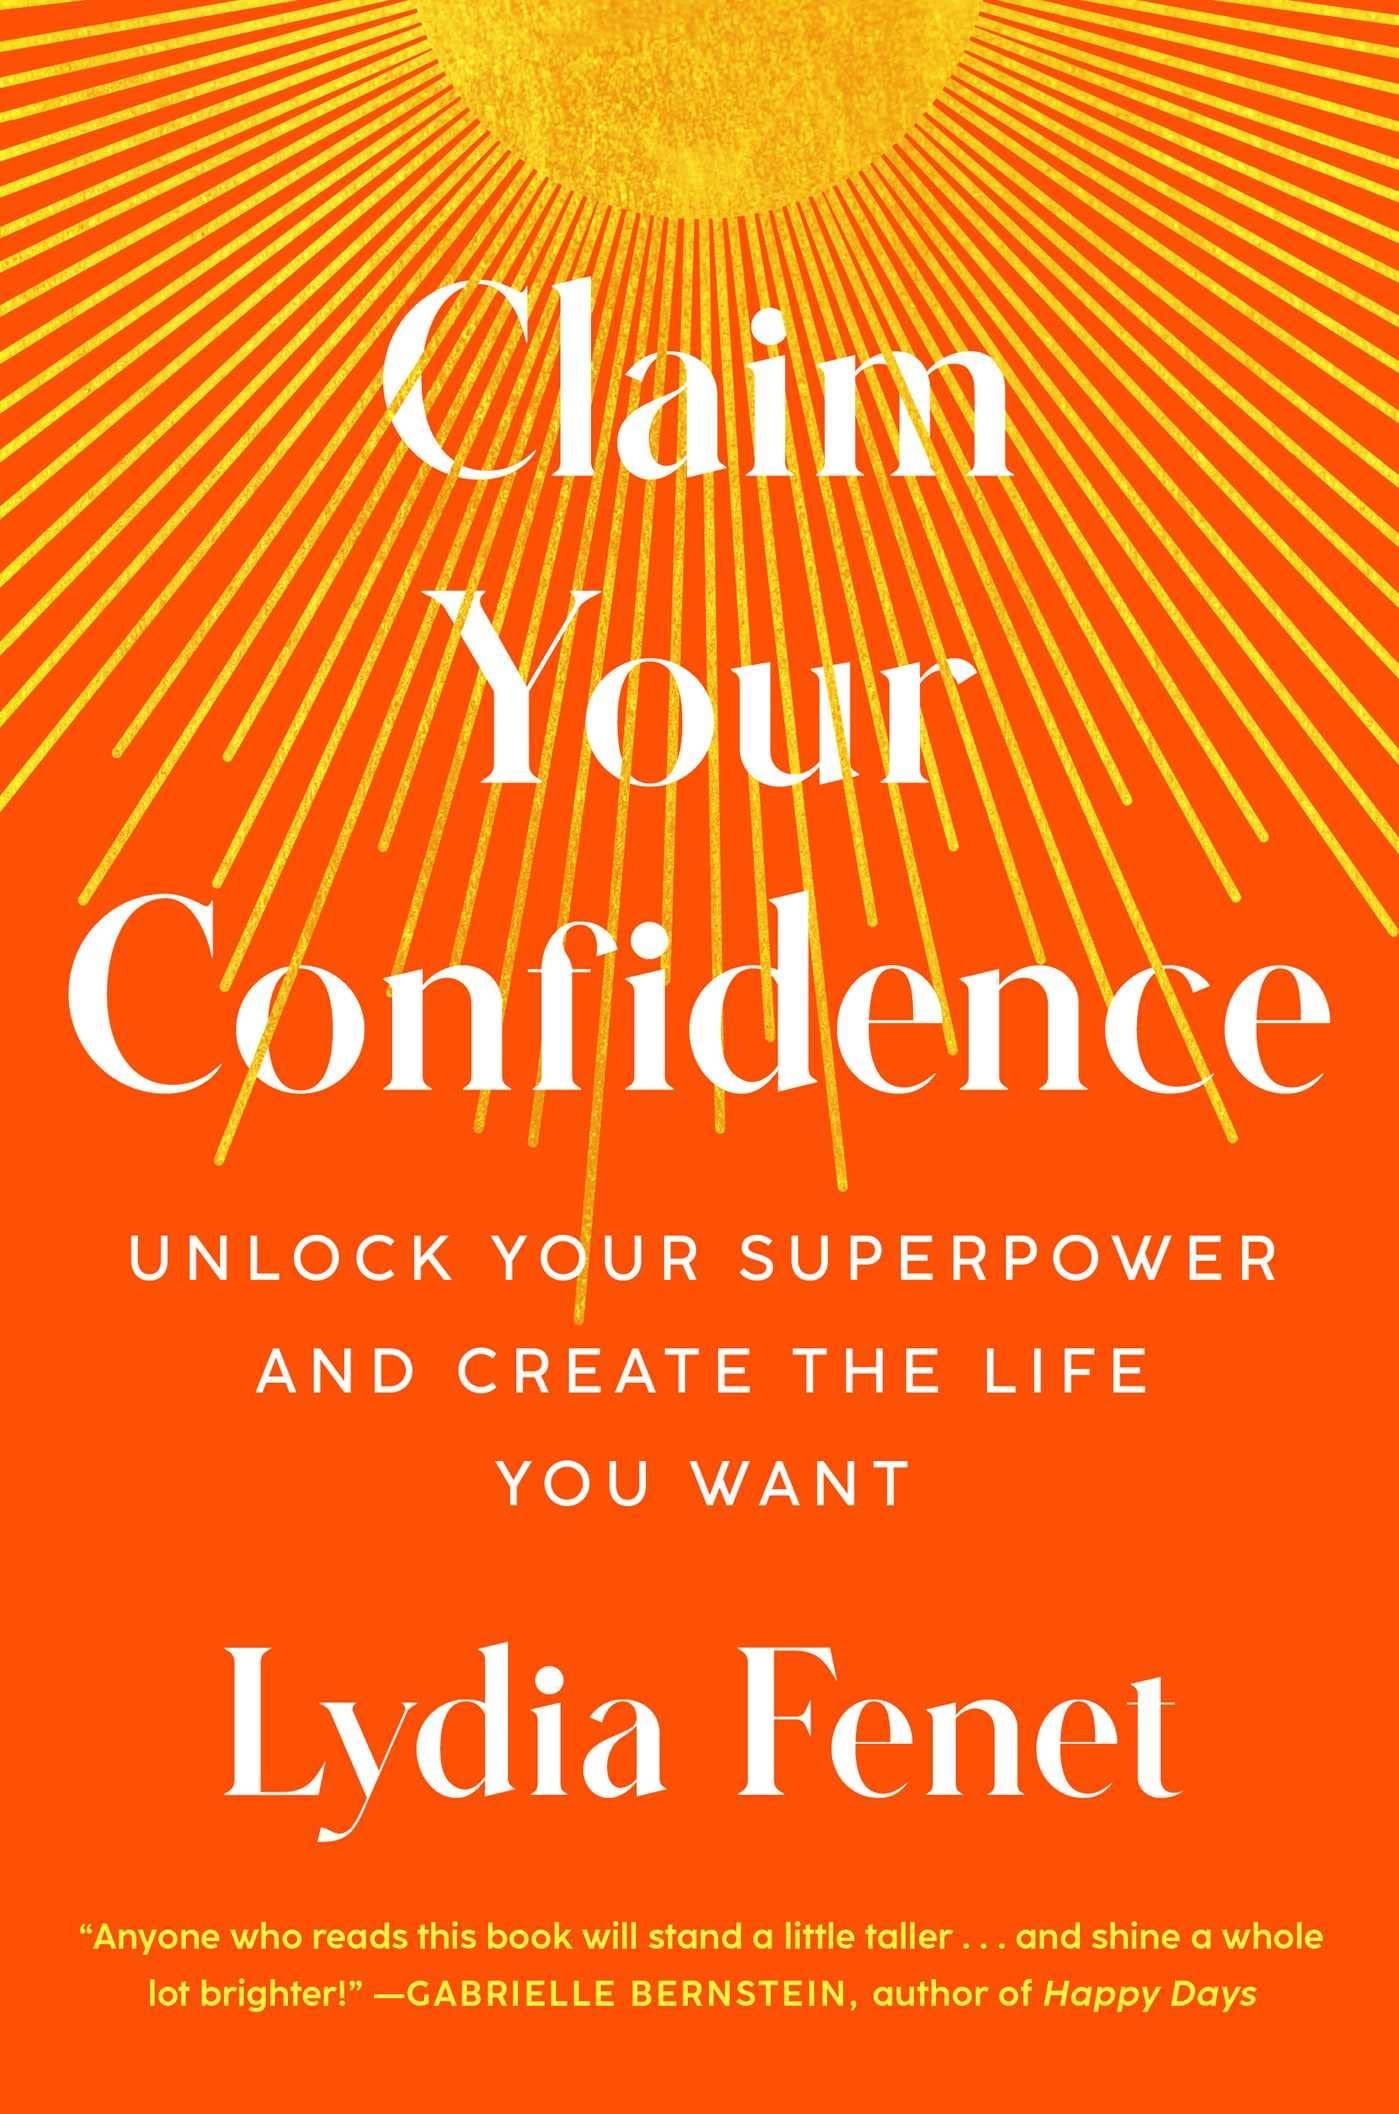 Claim Your Confidence : Unlock Your Superpower and Create the Life You Want